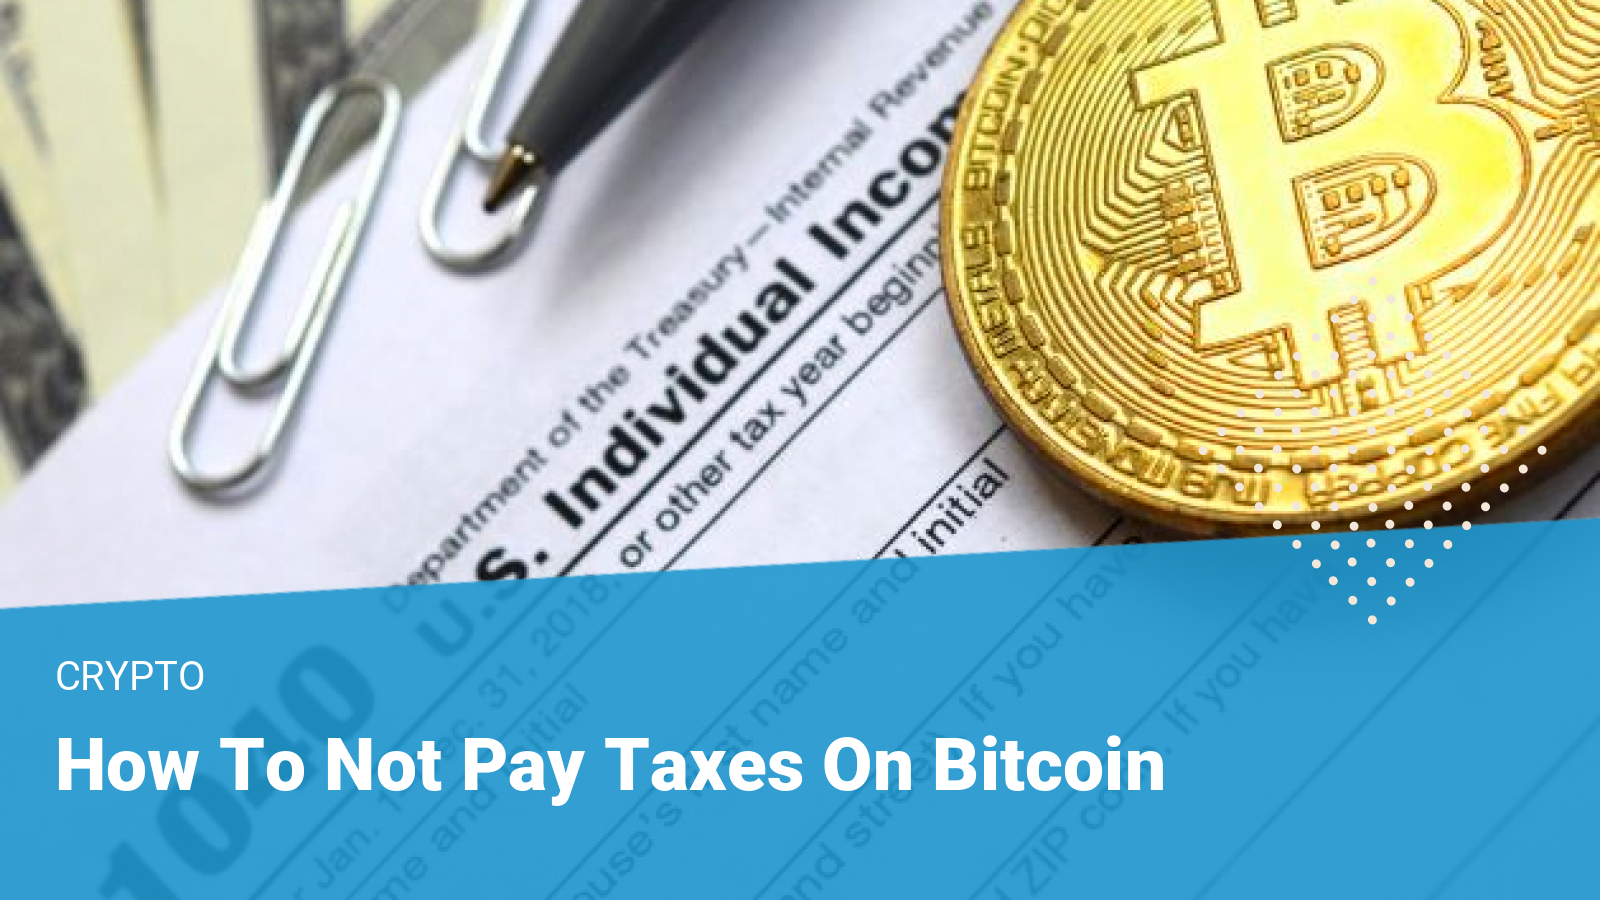 Your Crypto Tax Guide - TurboTax Tax Tips & Videos